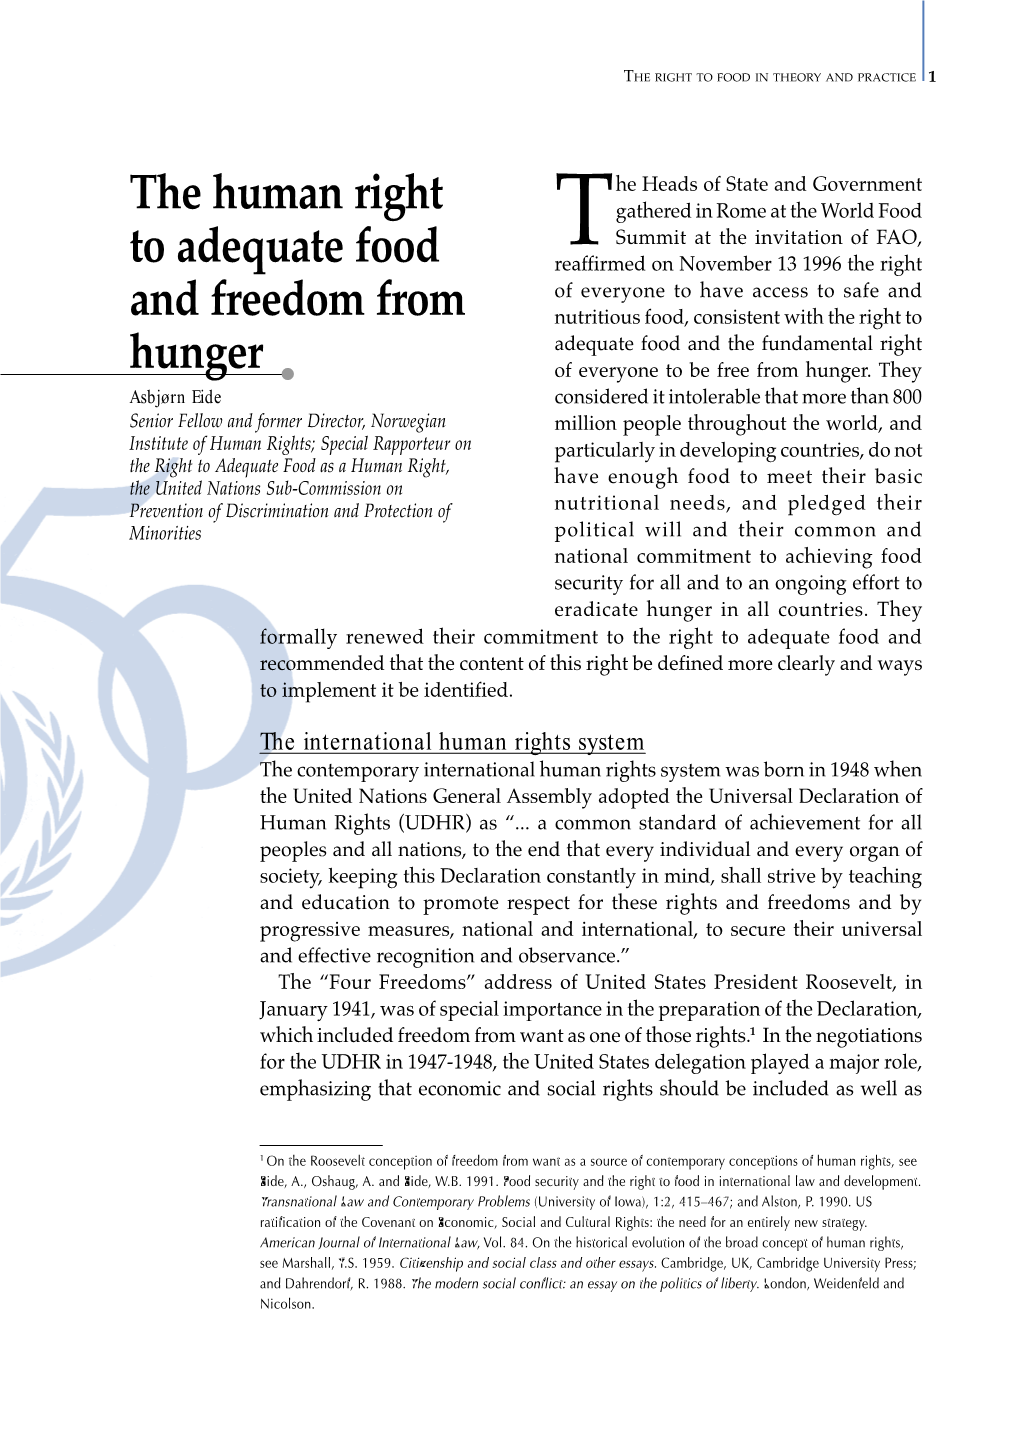 The Human Right to Adequate Food and Freedom from Hunger